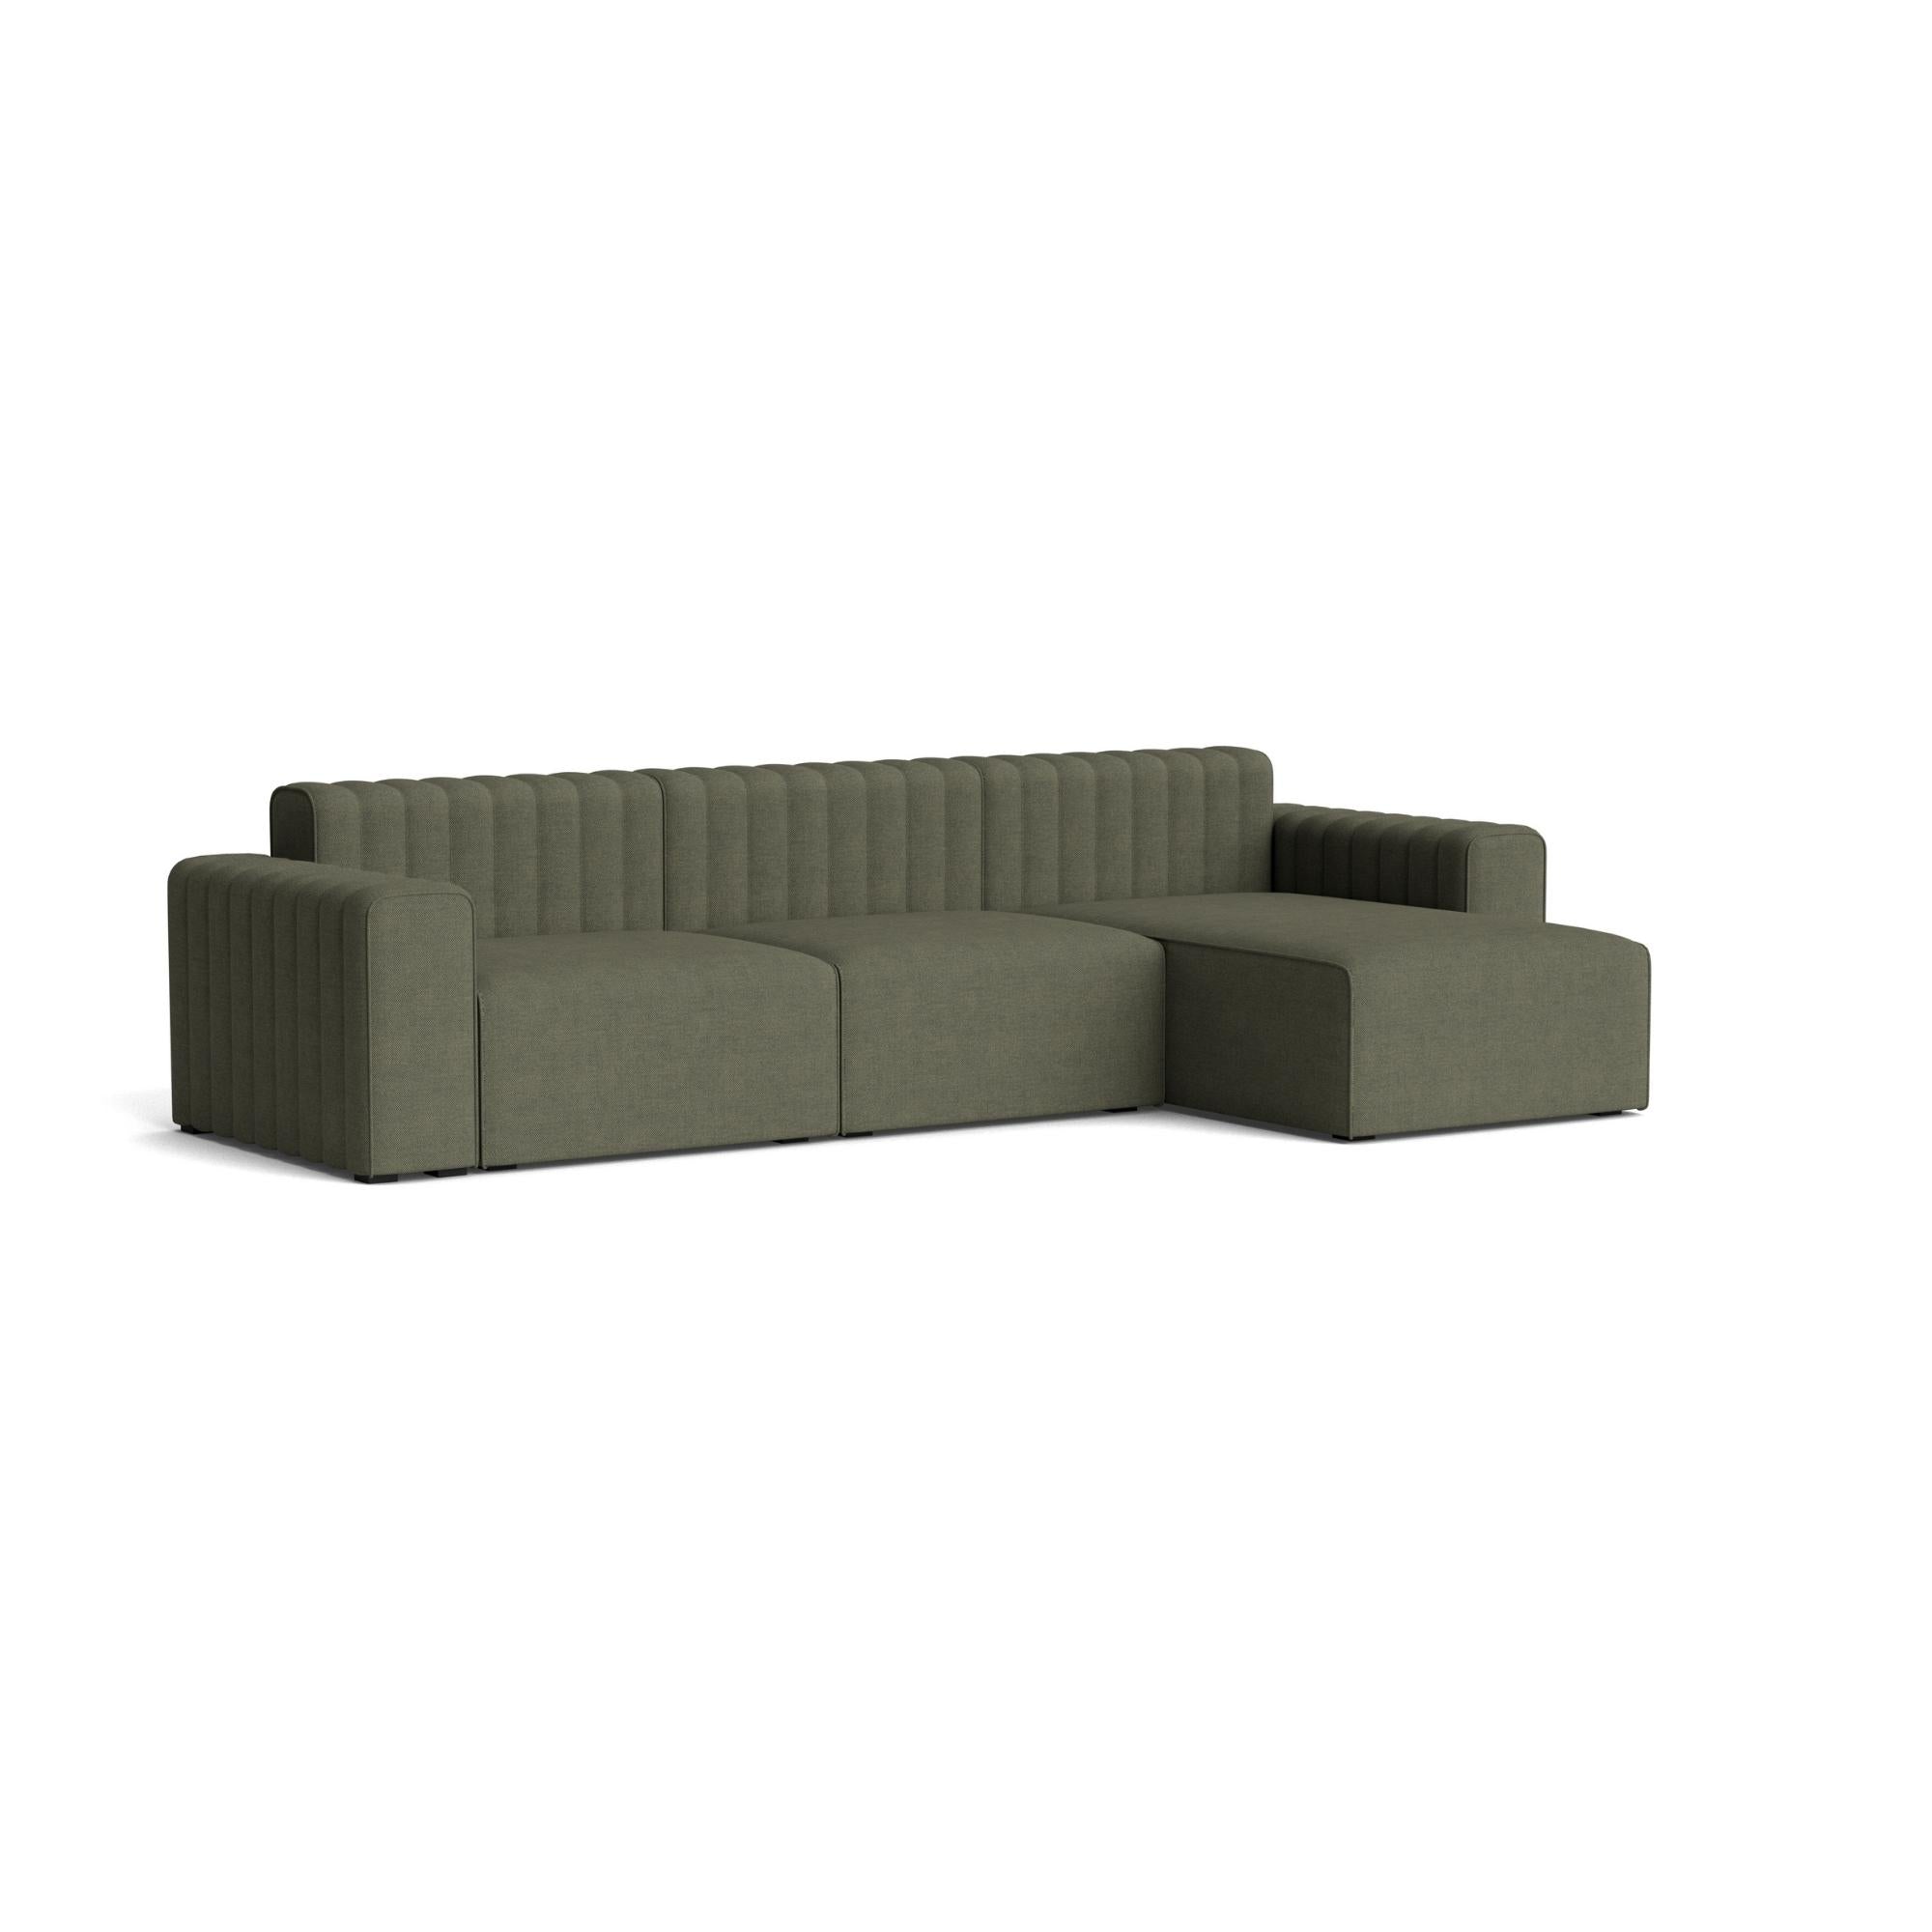 Riff Sofa Sectional - THAT COOL LIVING